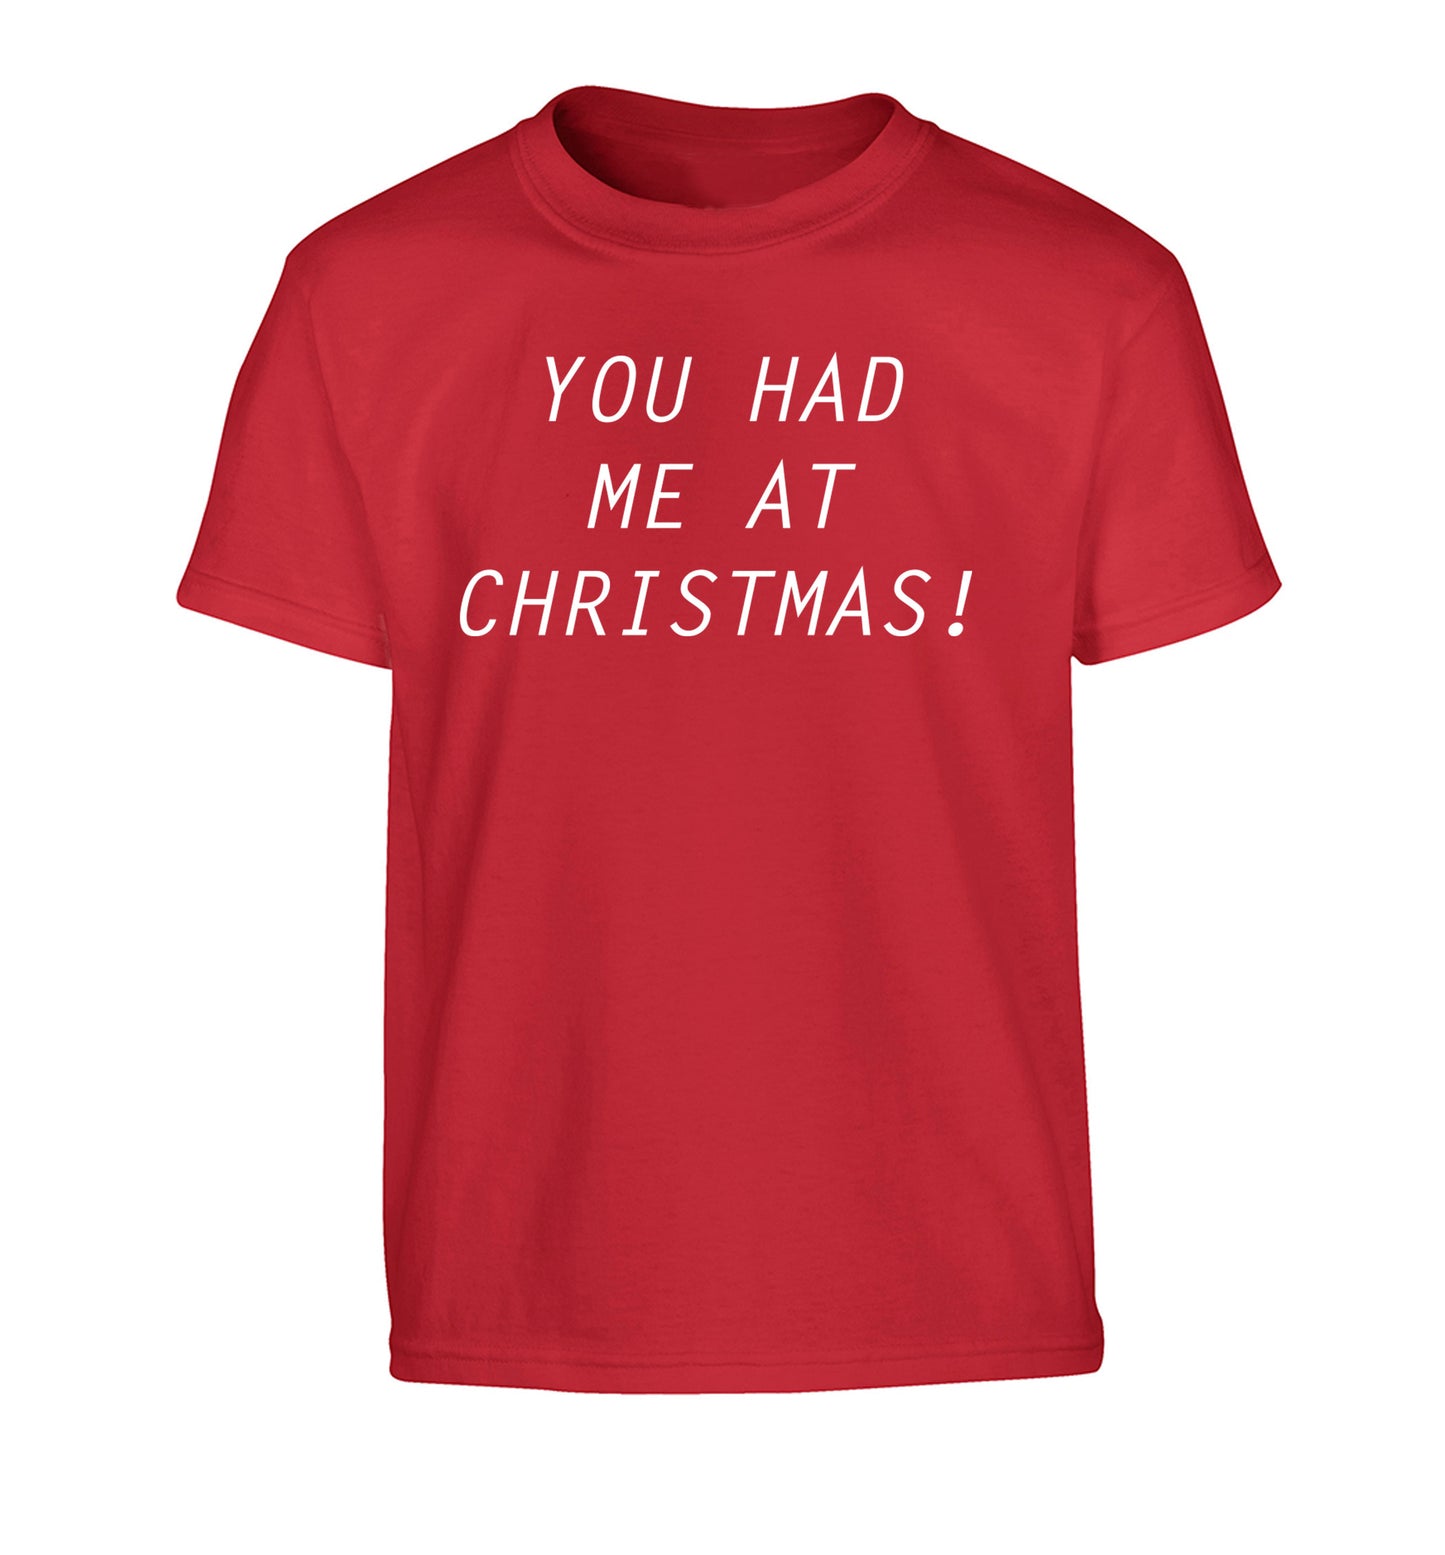 You had me at Christmas Children's red Tshirt 12-14 Years